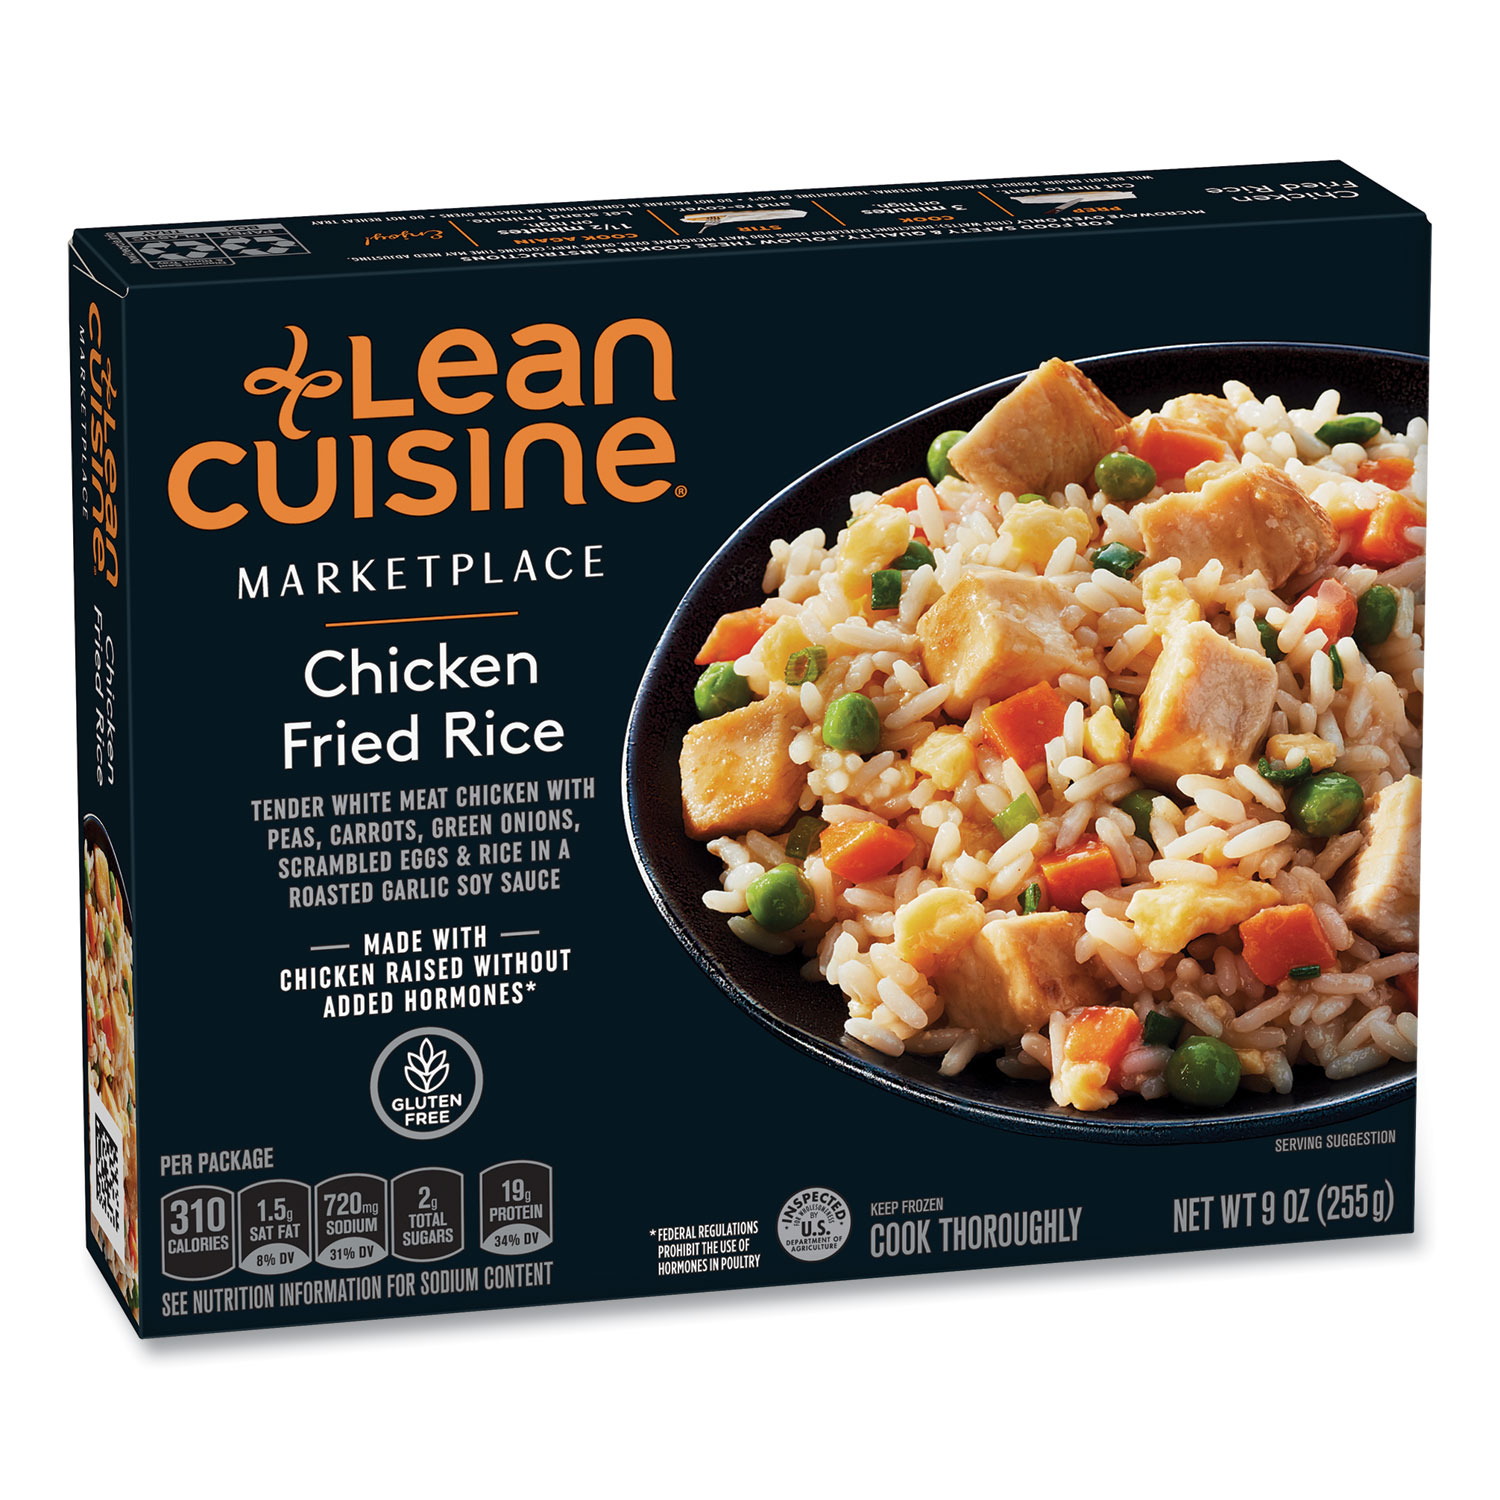 Lean Cuisine® Marketplace Chicken Fried Rice, 9 oz Box, 3 Boxes/Pack, Free Delivery in 1-4 Business Days